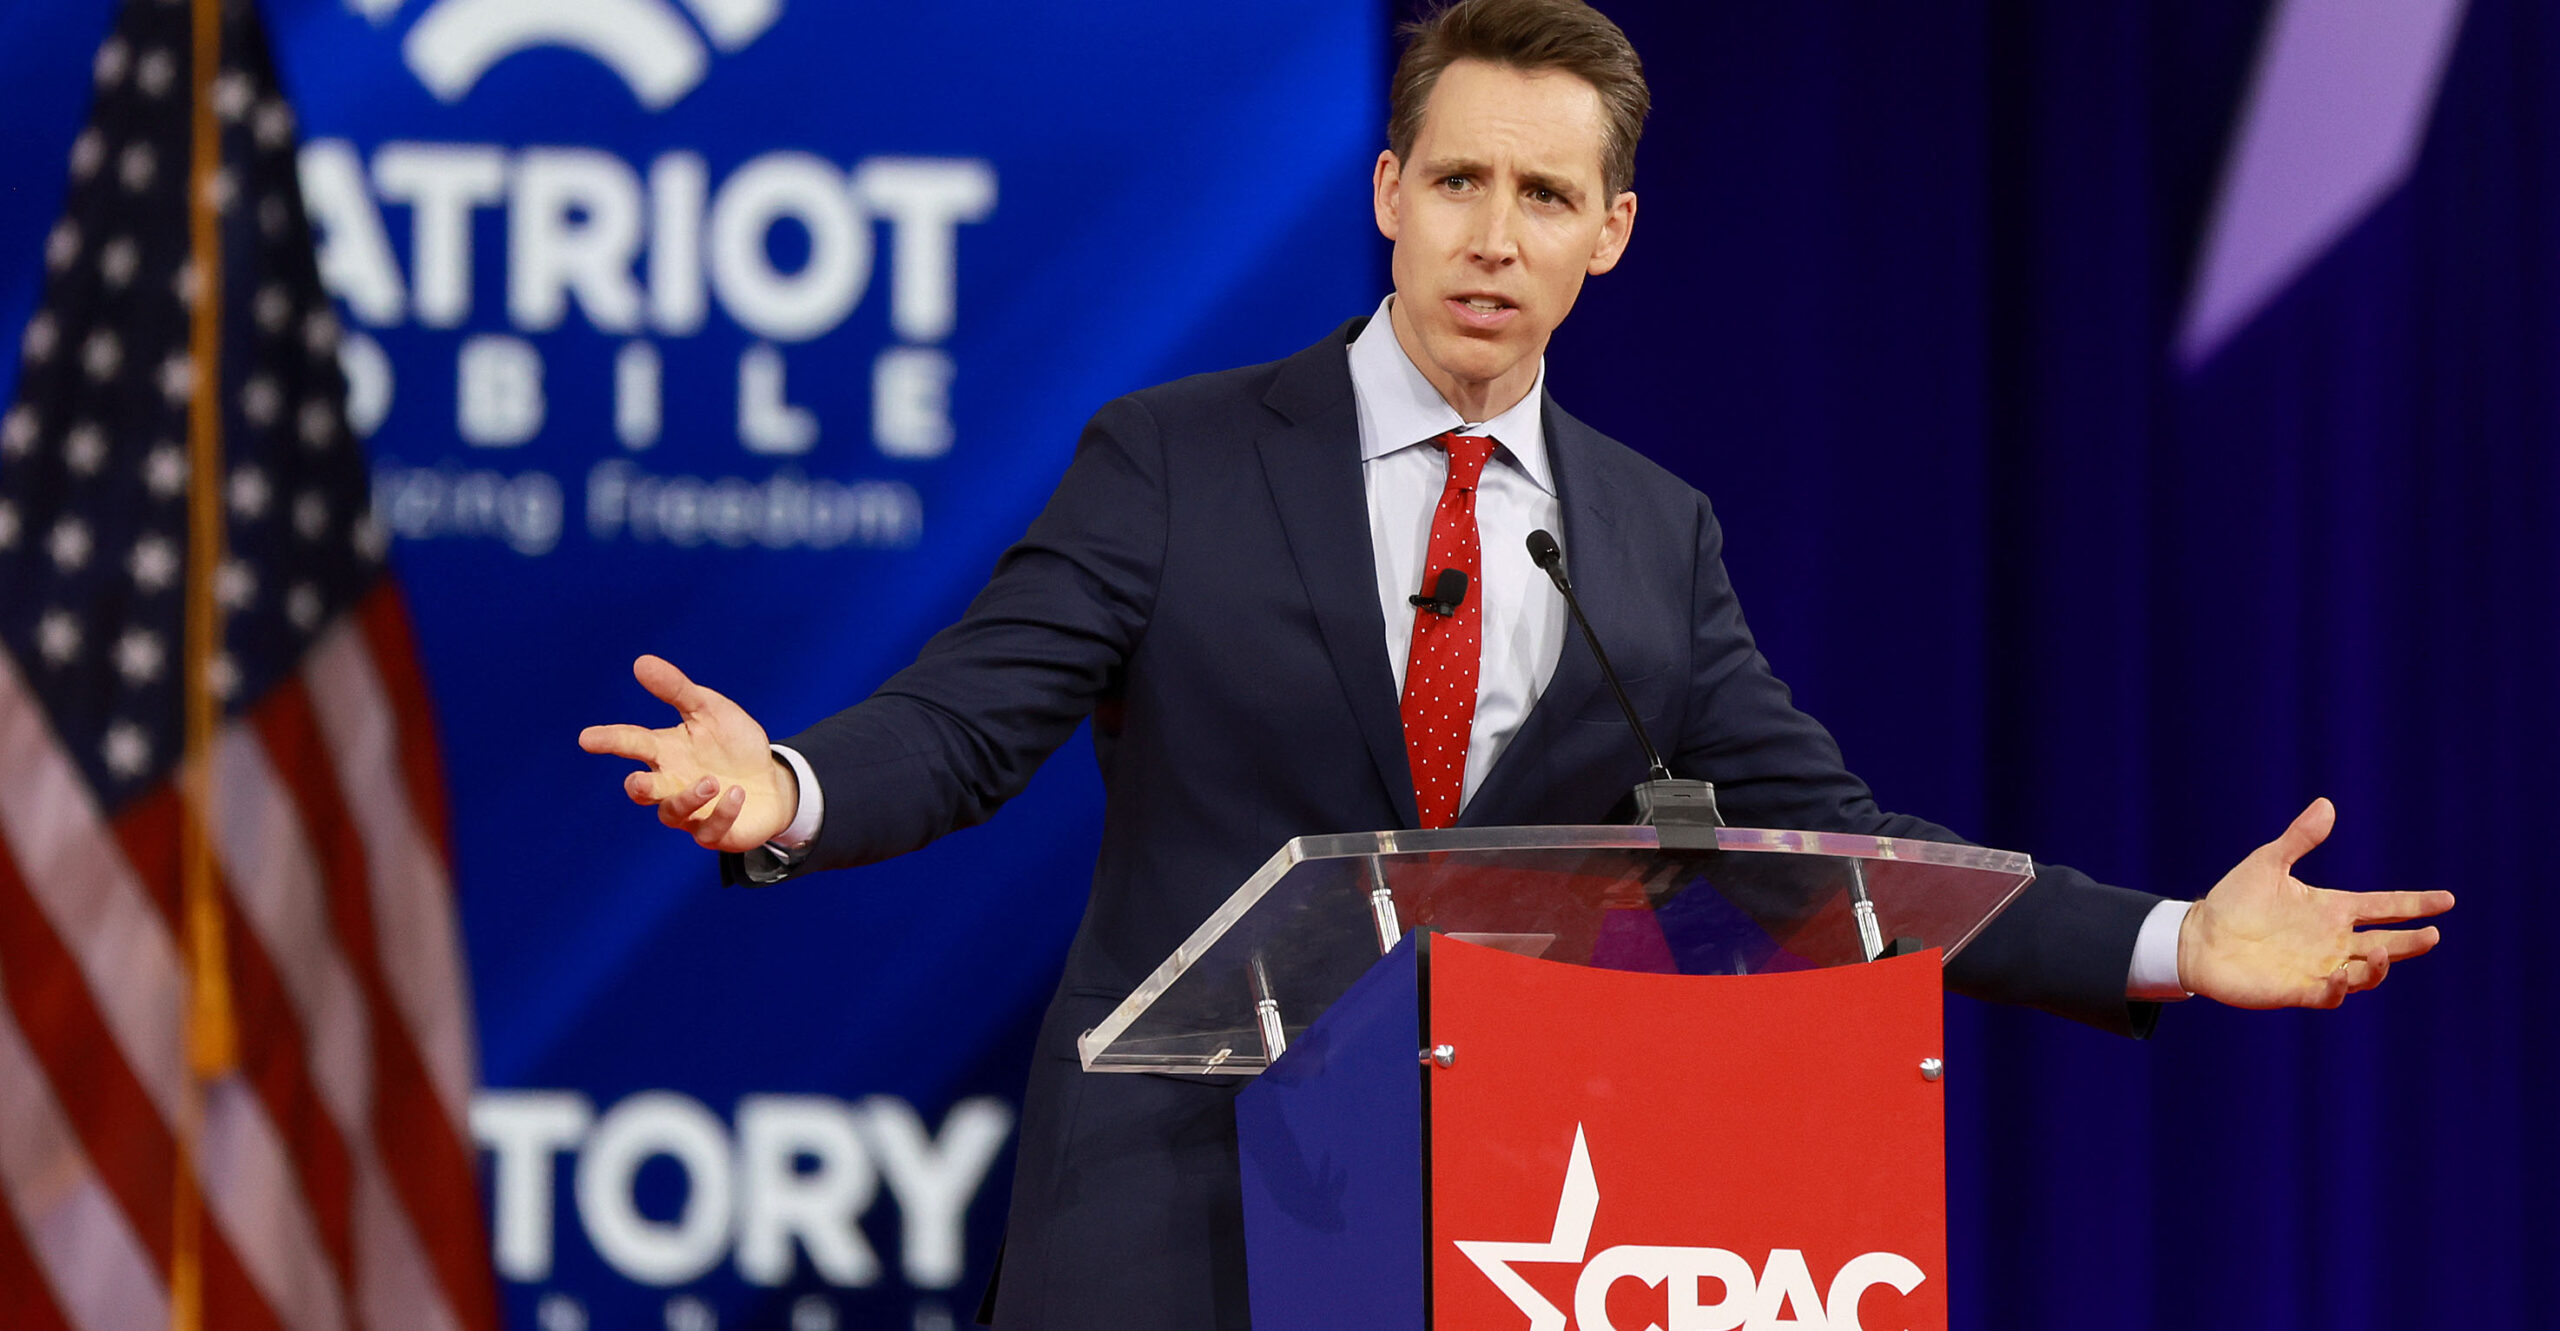 America’s Best Move Against Putin, Russia Would Be Energy Revival, Sen. Josh Hawley Says